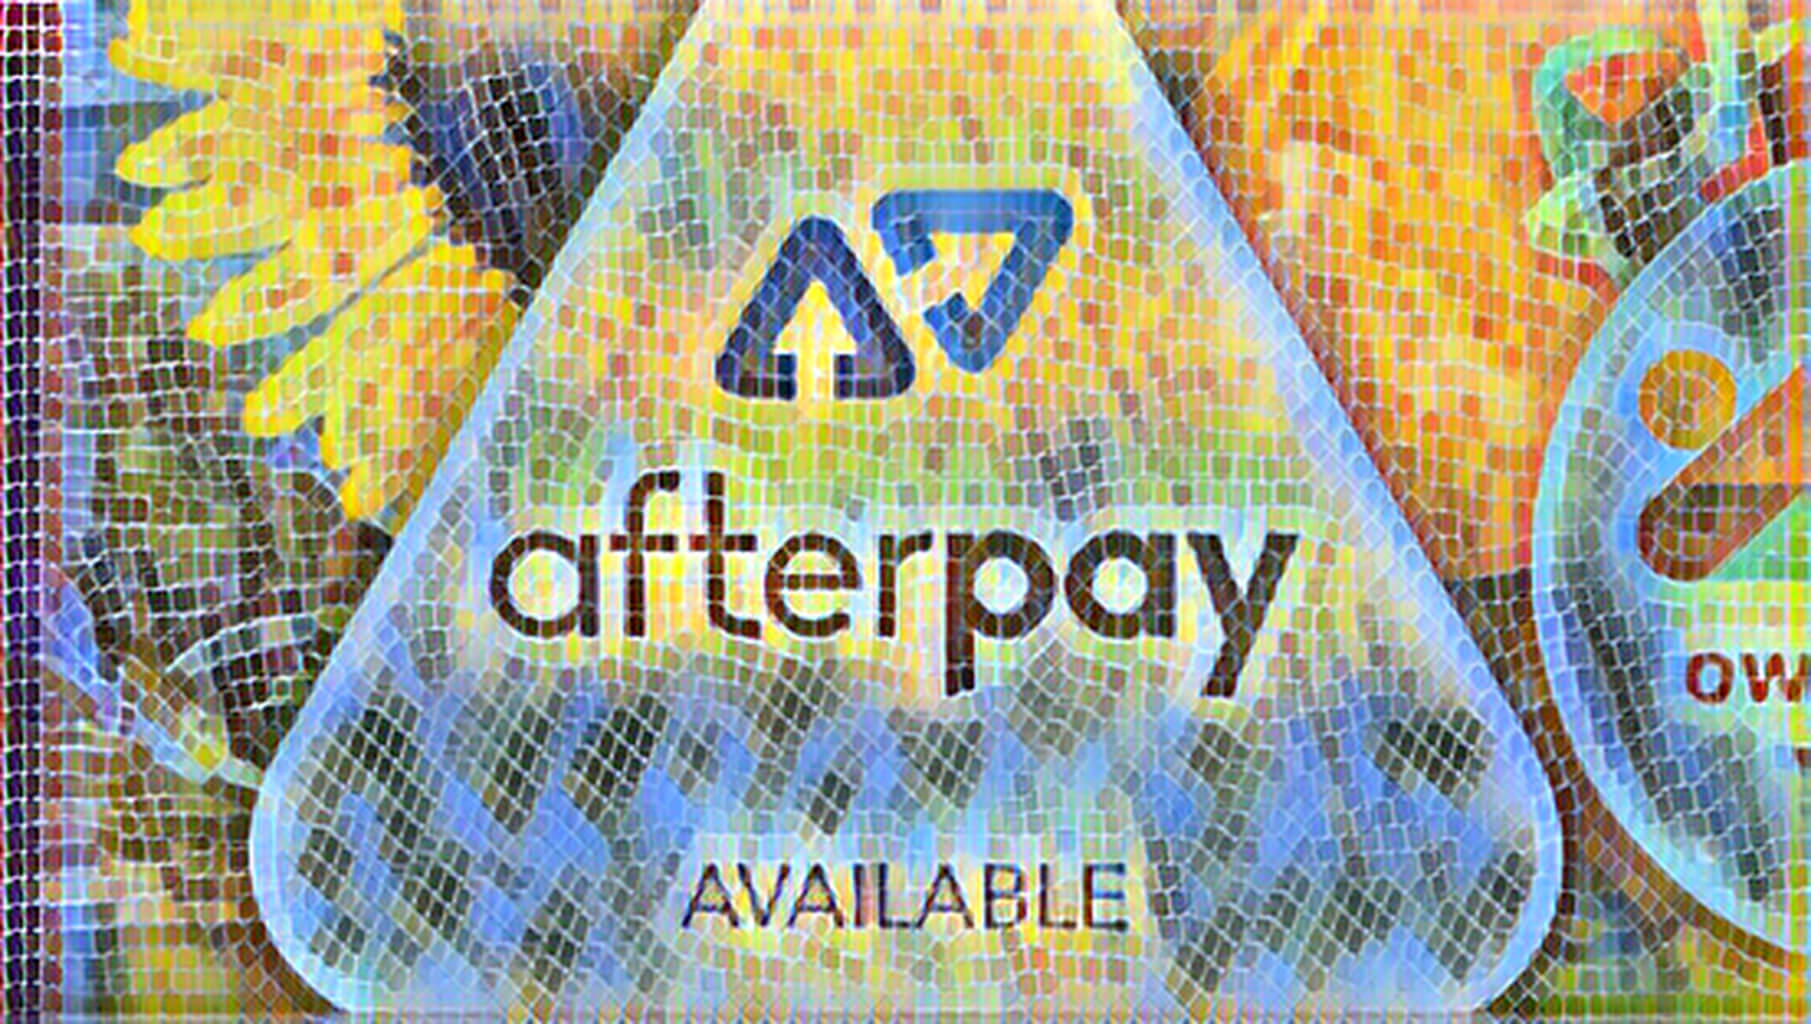    afterpay     